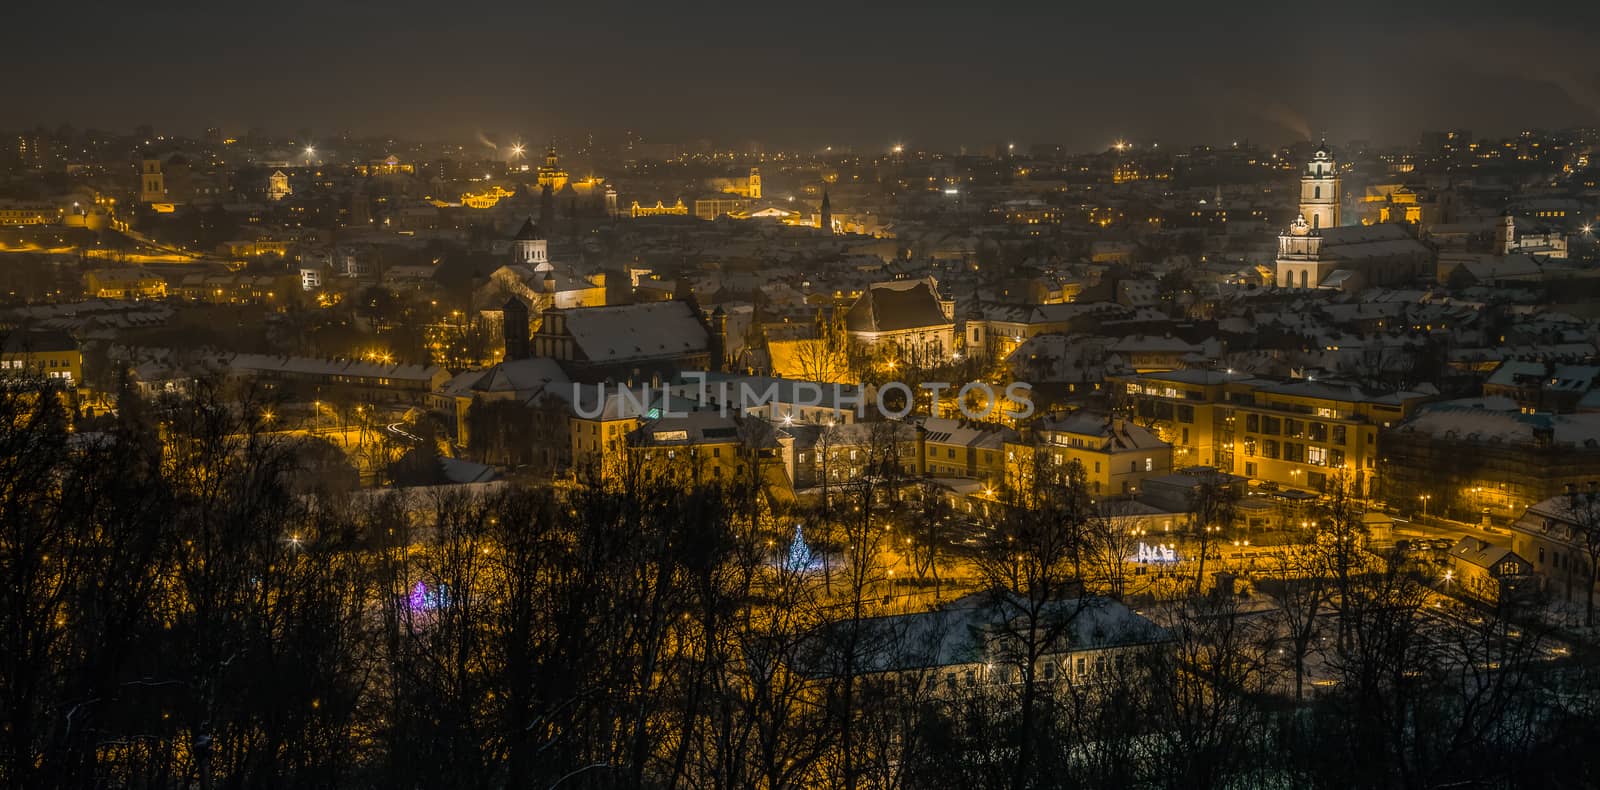 Vilnius Aerial panorama of the Old Town. Vilnius old town panorama at night. Night panorama of the Vilnius Old Town from Hill of Three Crosses, Lithuania. Vilnius winter aerial panorama of Old town.